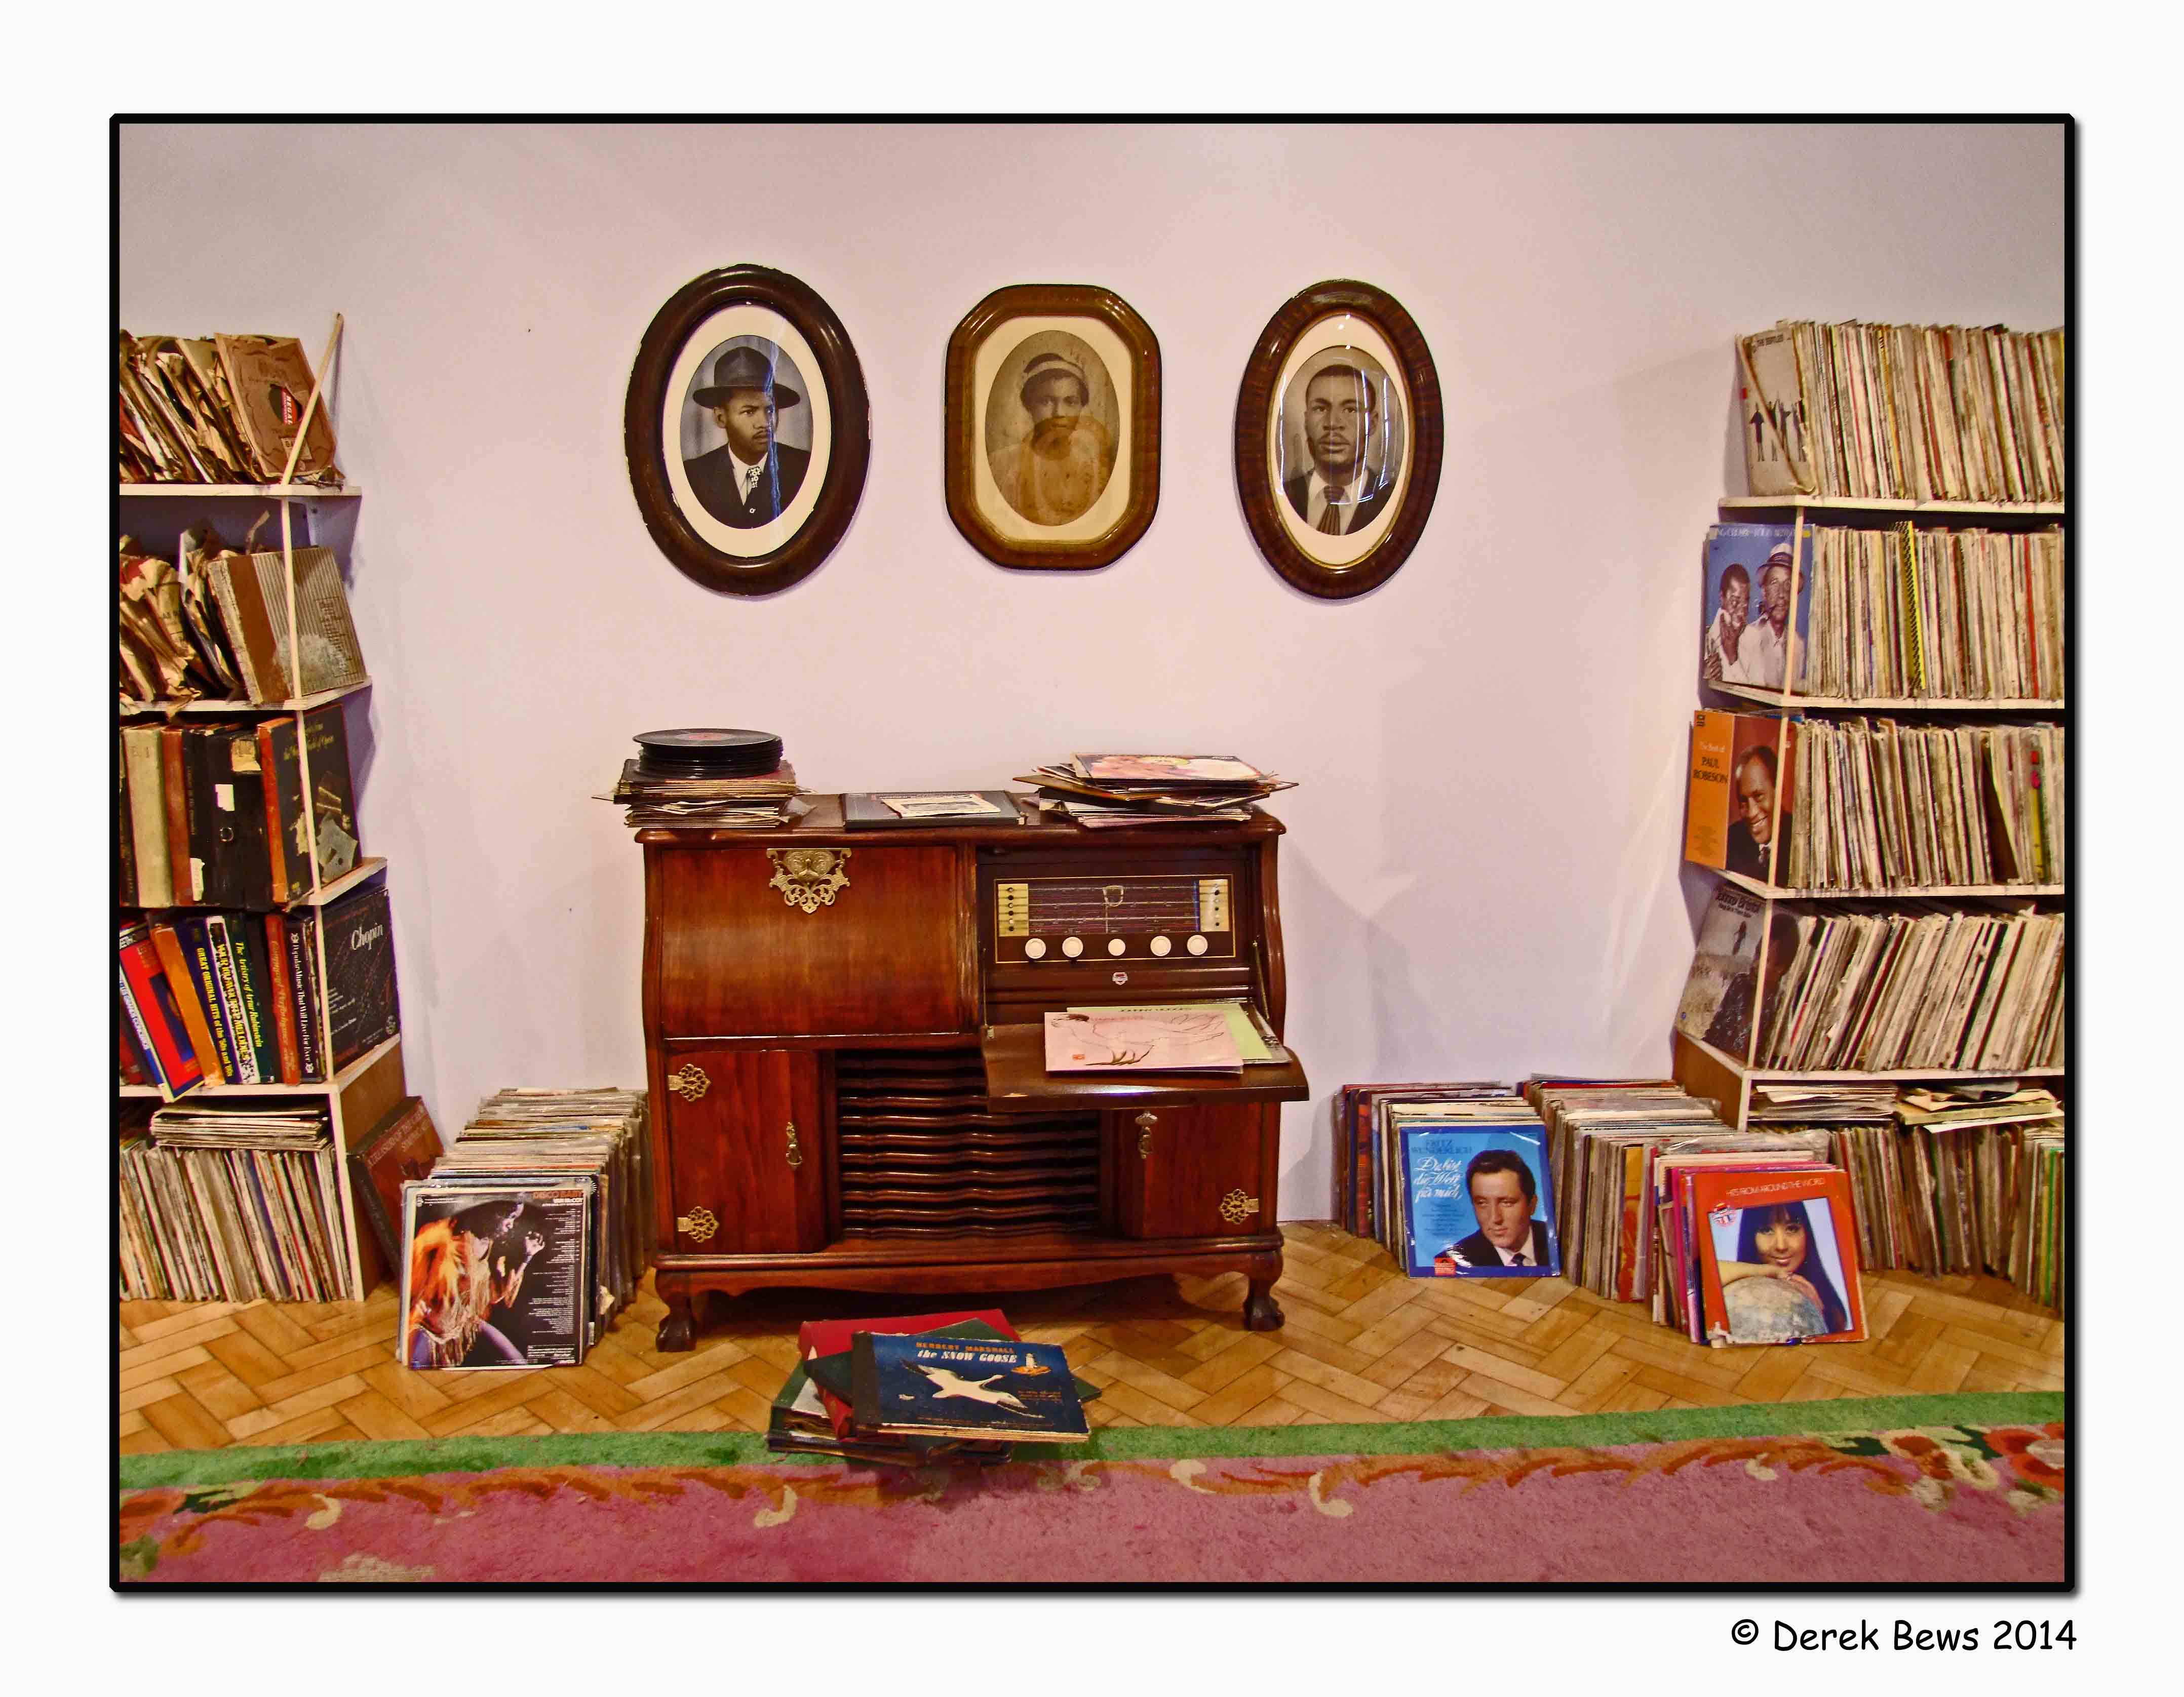 My Fathers Music Room, 2007-2008